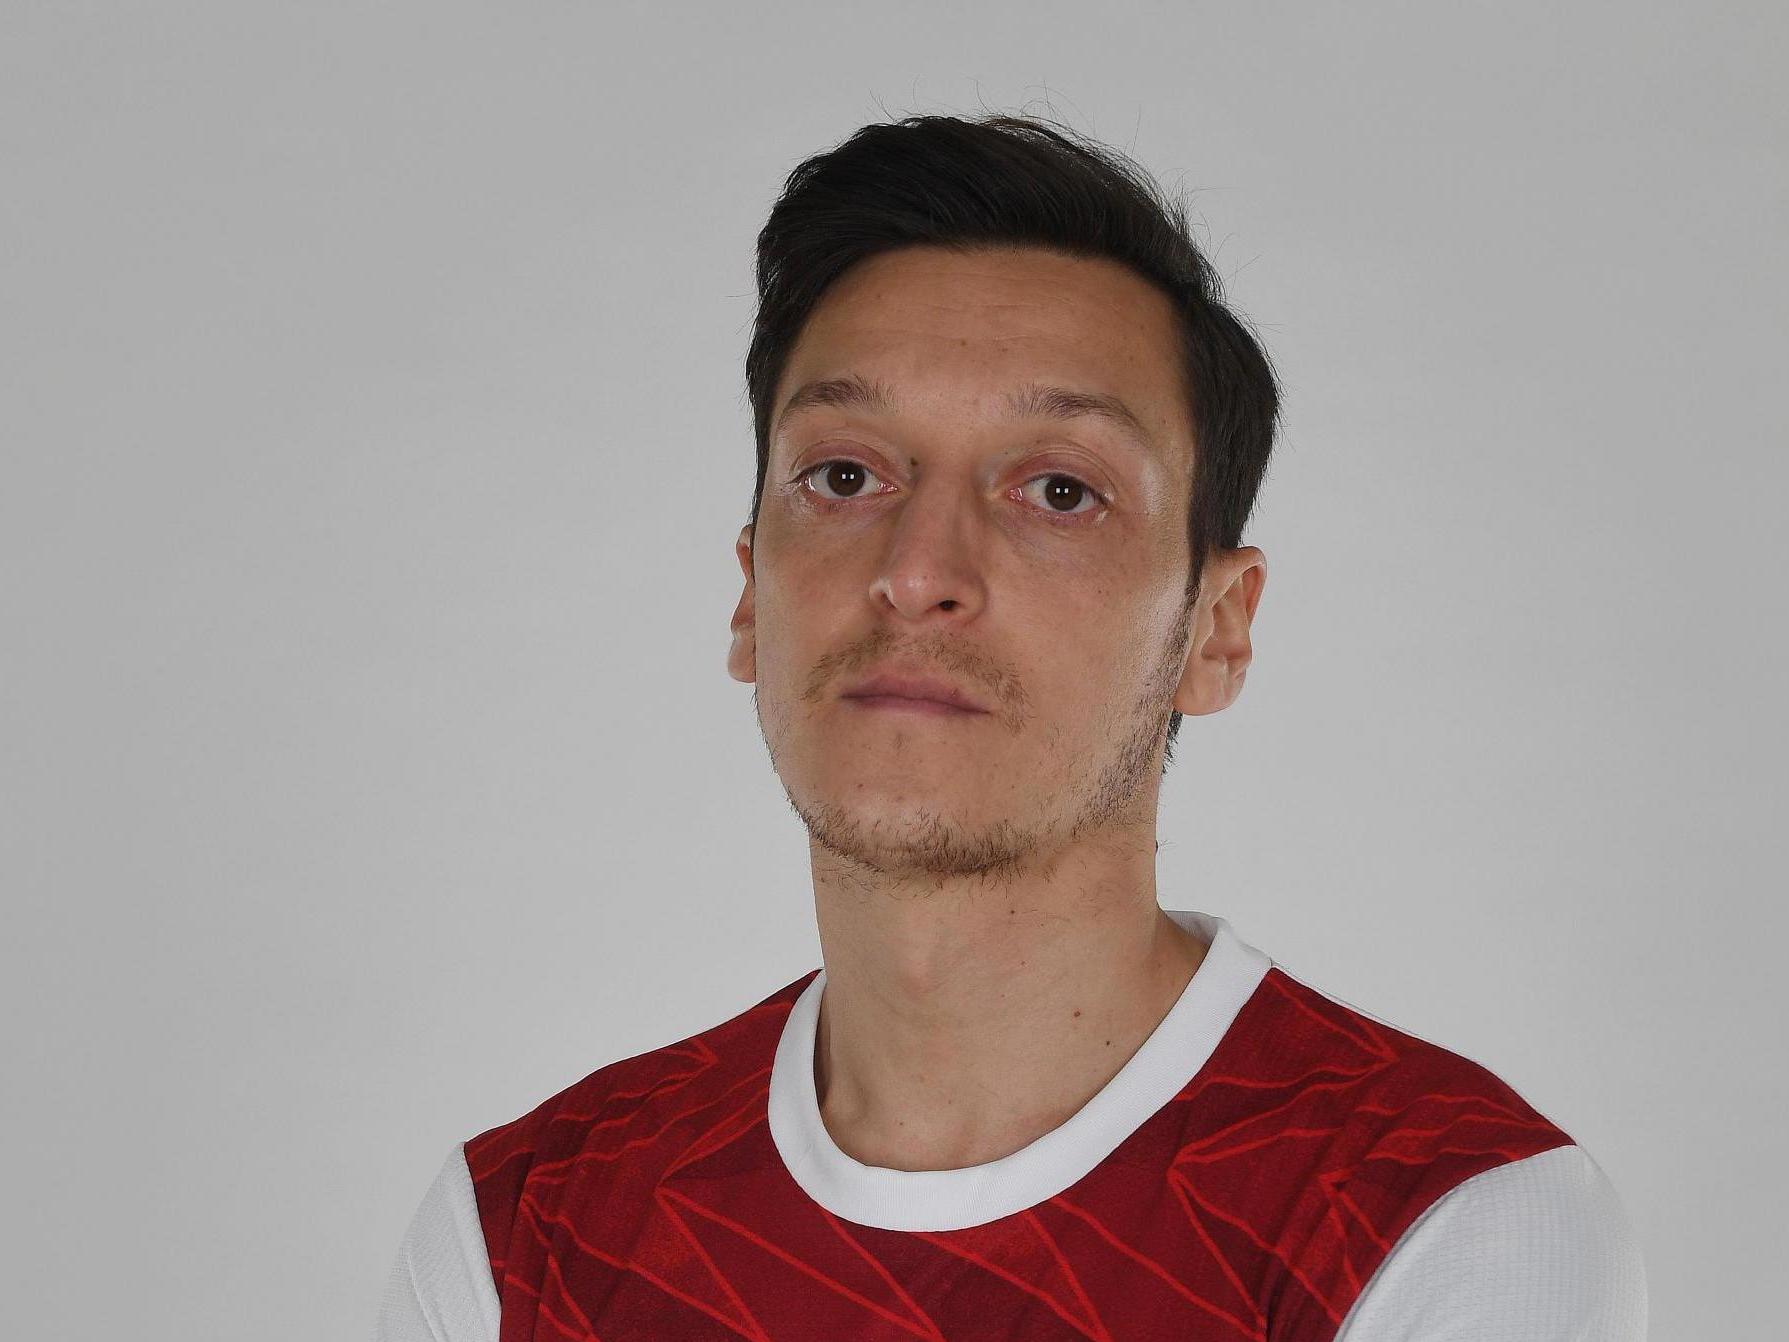 'People have been trying to destroy me' – Mesut Ozil defends decision to reject Arsenal pay cut 